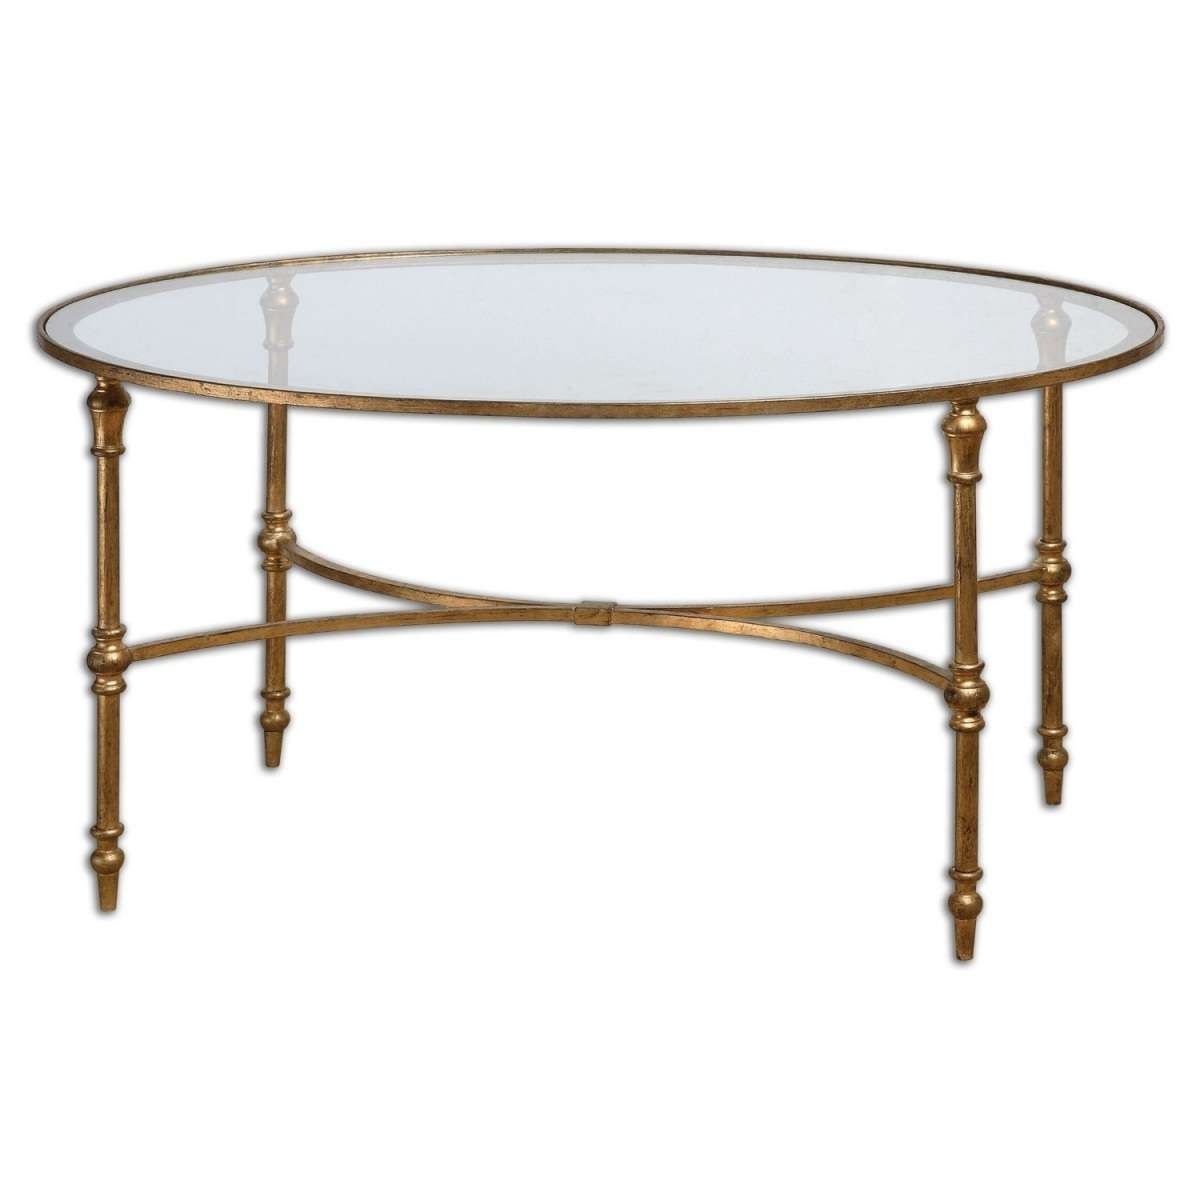 Oval Glass Coffee Table Set In Rummy Black Pyramid Design Oval For Fashionable Metal Oval Coffee Tables (View 12 of 20)